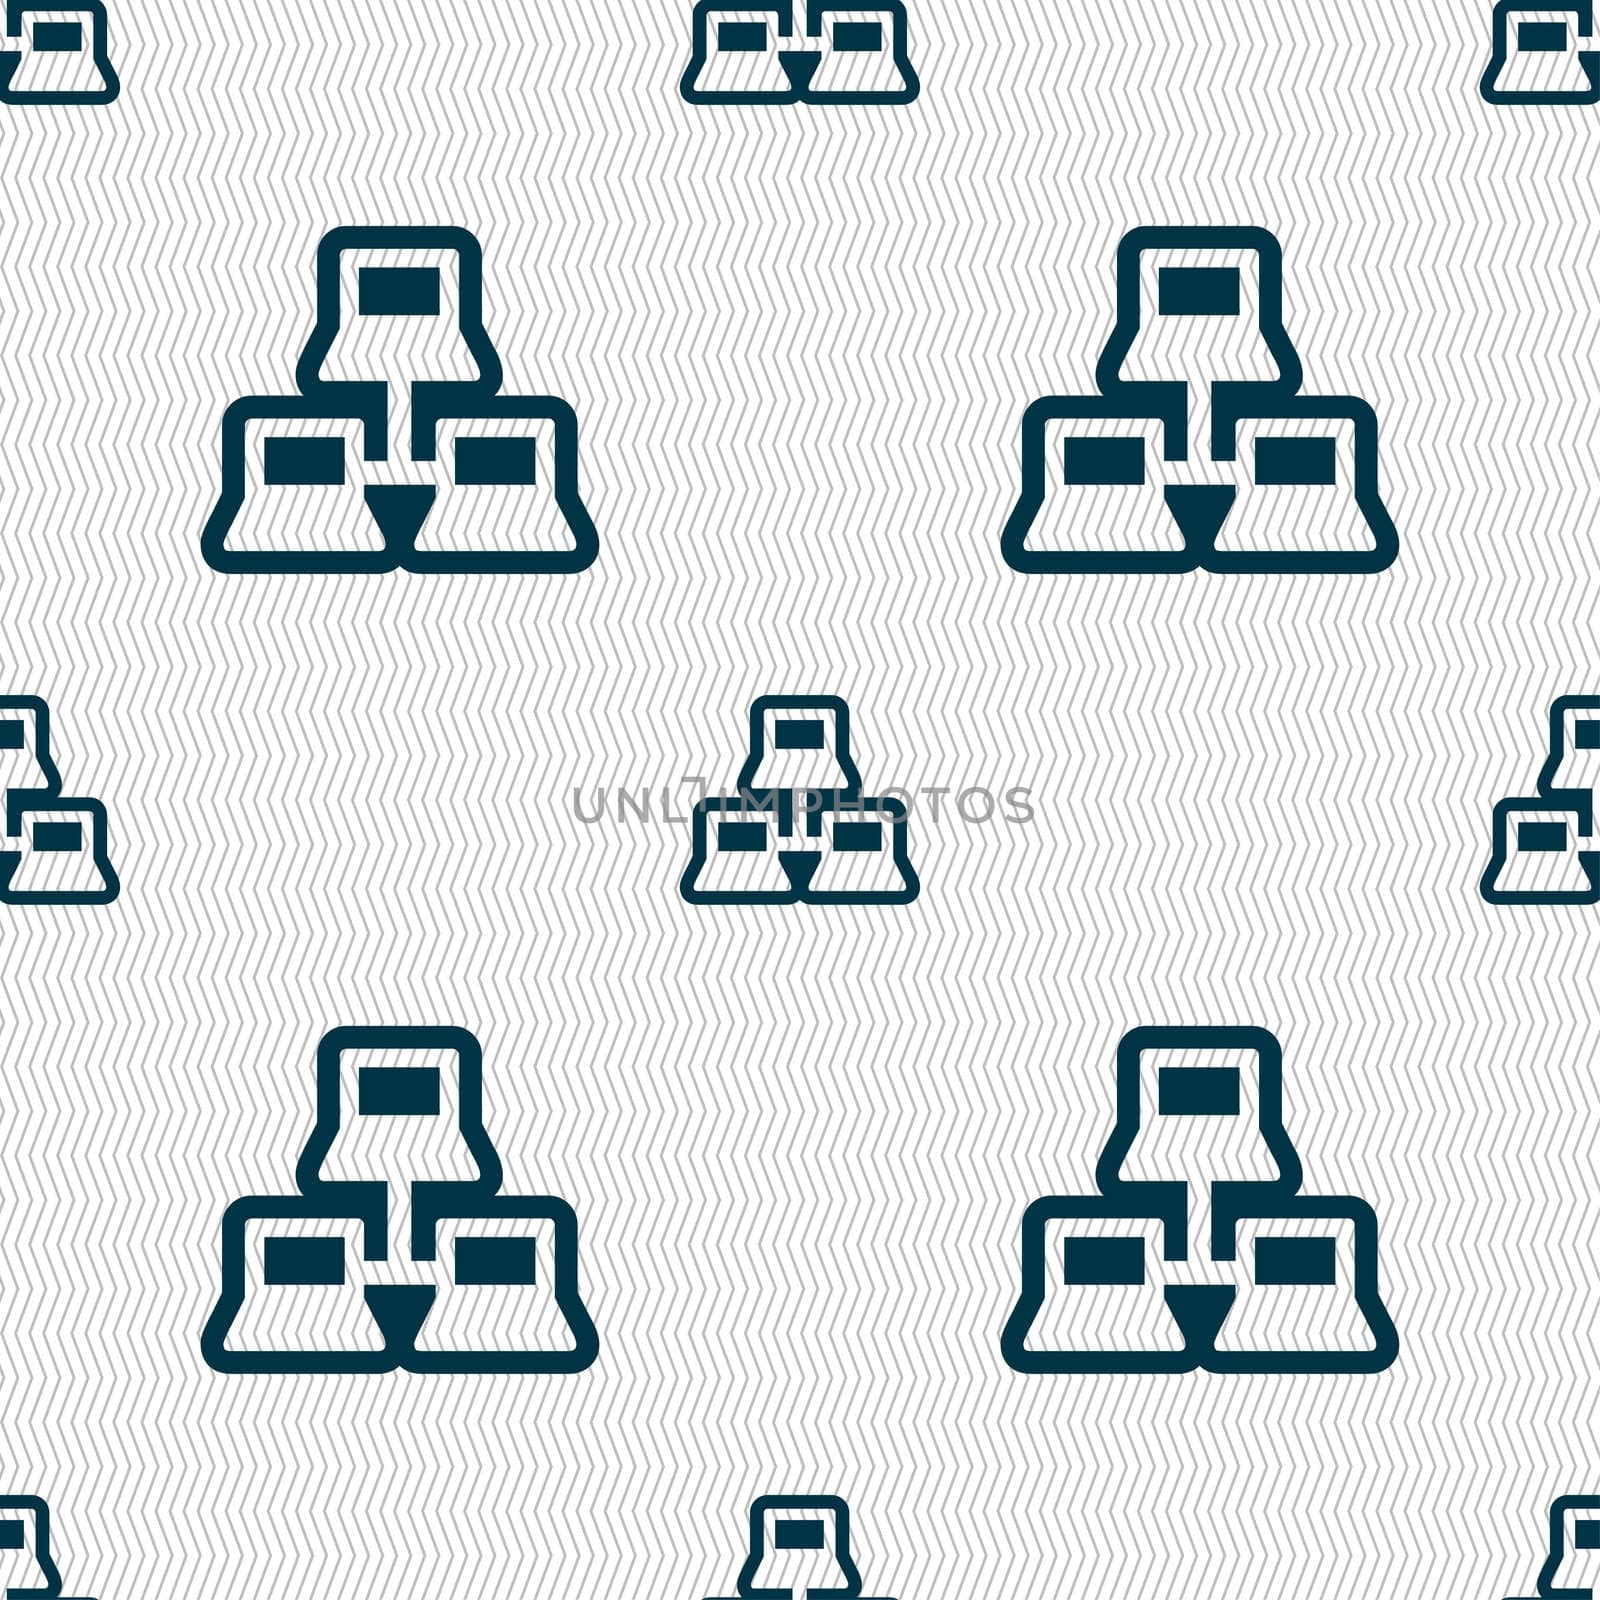 local area network icon sign. Seamless pattern with geometric texture. illustration